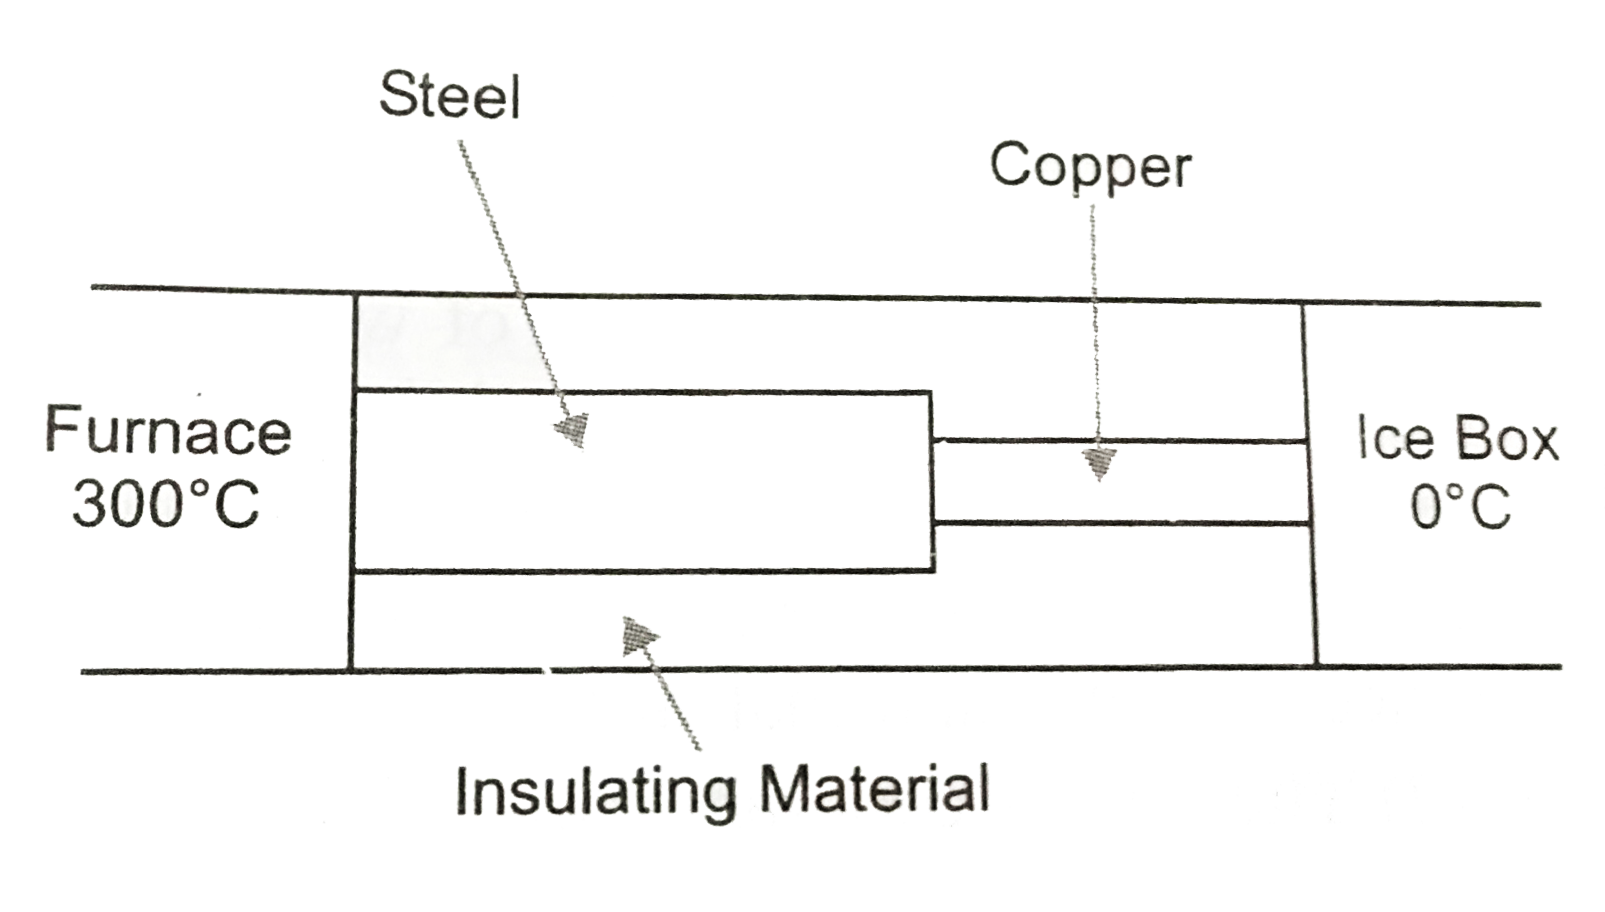 What is the temperature of steel-copper jumction in the steady state of the system shown in fig. Length of the steel rod = 30.0 cm, length of the copper rod = 20.0 cm,  temperature of the furnace = 300^(@)C, temperature of cold end =0^(@)C . The area of cross-section of the steel rod is twice that of the copper rod. thermal conductivity of steel = 50 .2 Js^(-1) m^(-1)  .^(@)C^(-1) and of copper = 358 Js^(-1) m^(-1)  .^(@)C^(-1).